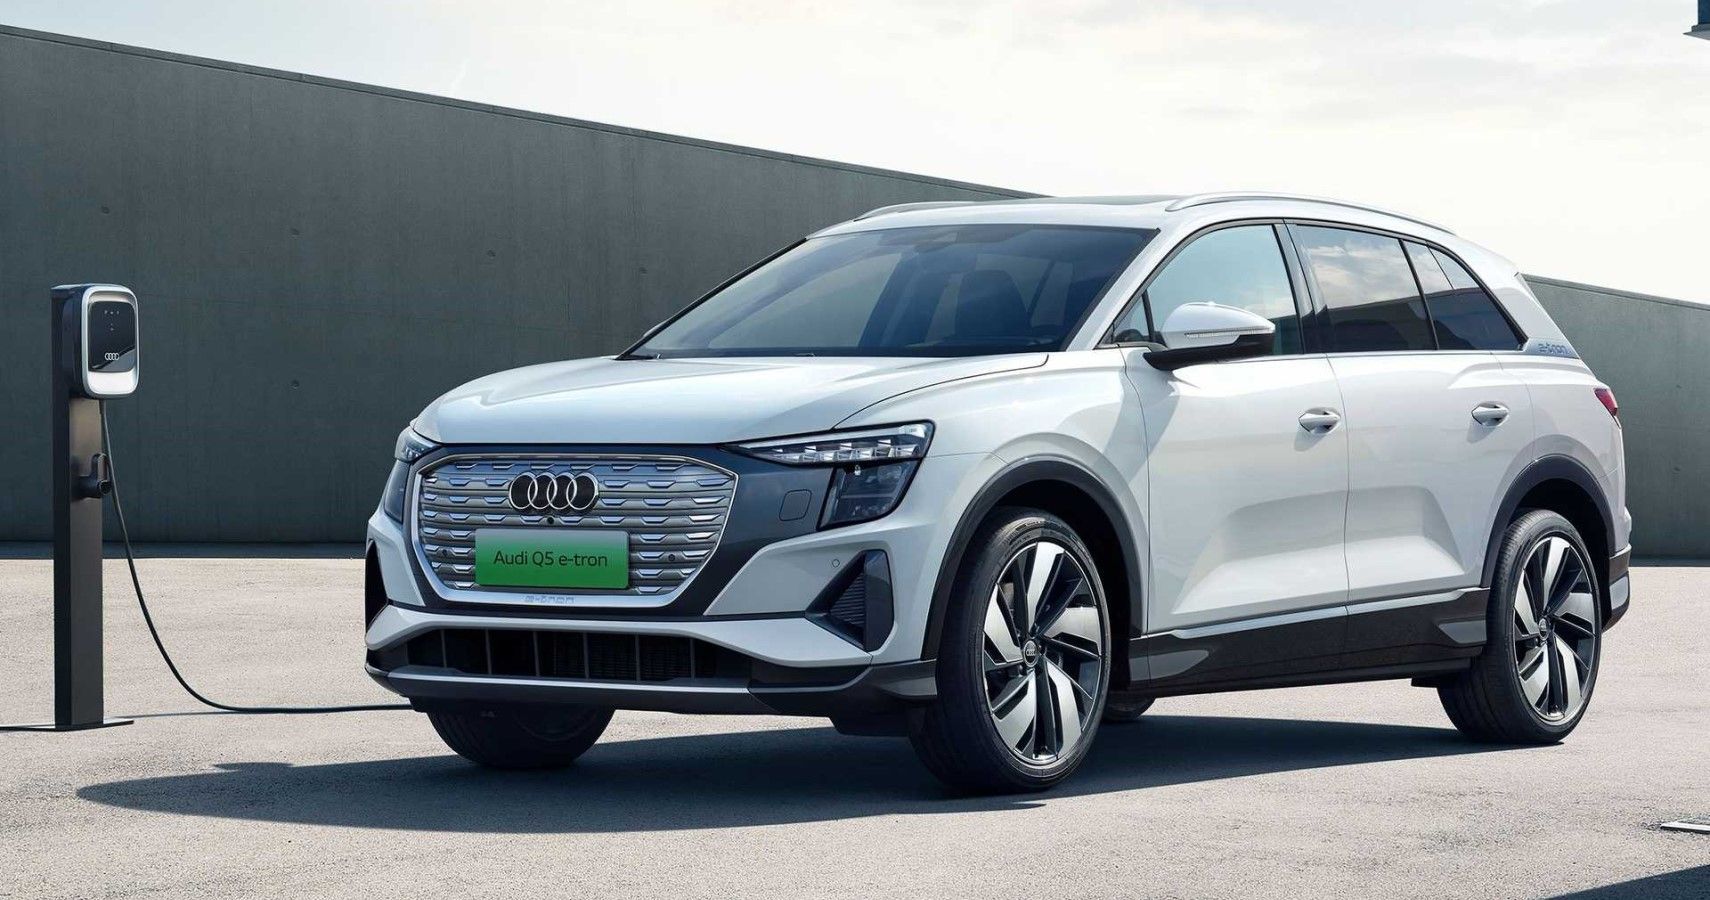 Everything You Need To Know About The 2022 Audi Q5 e-tron